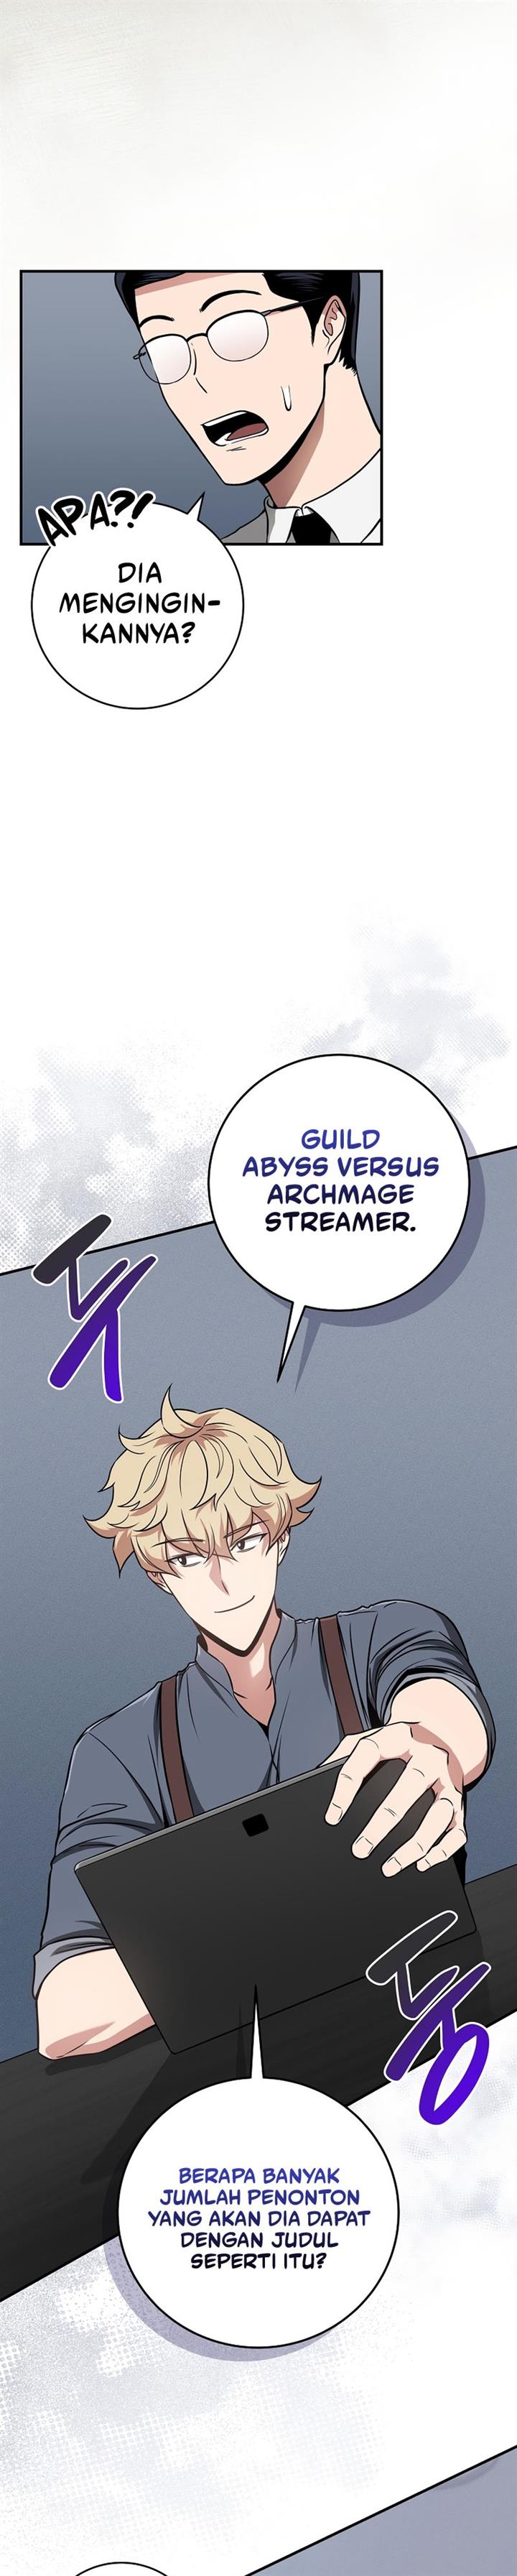 Archmage Streamer Chapter 44